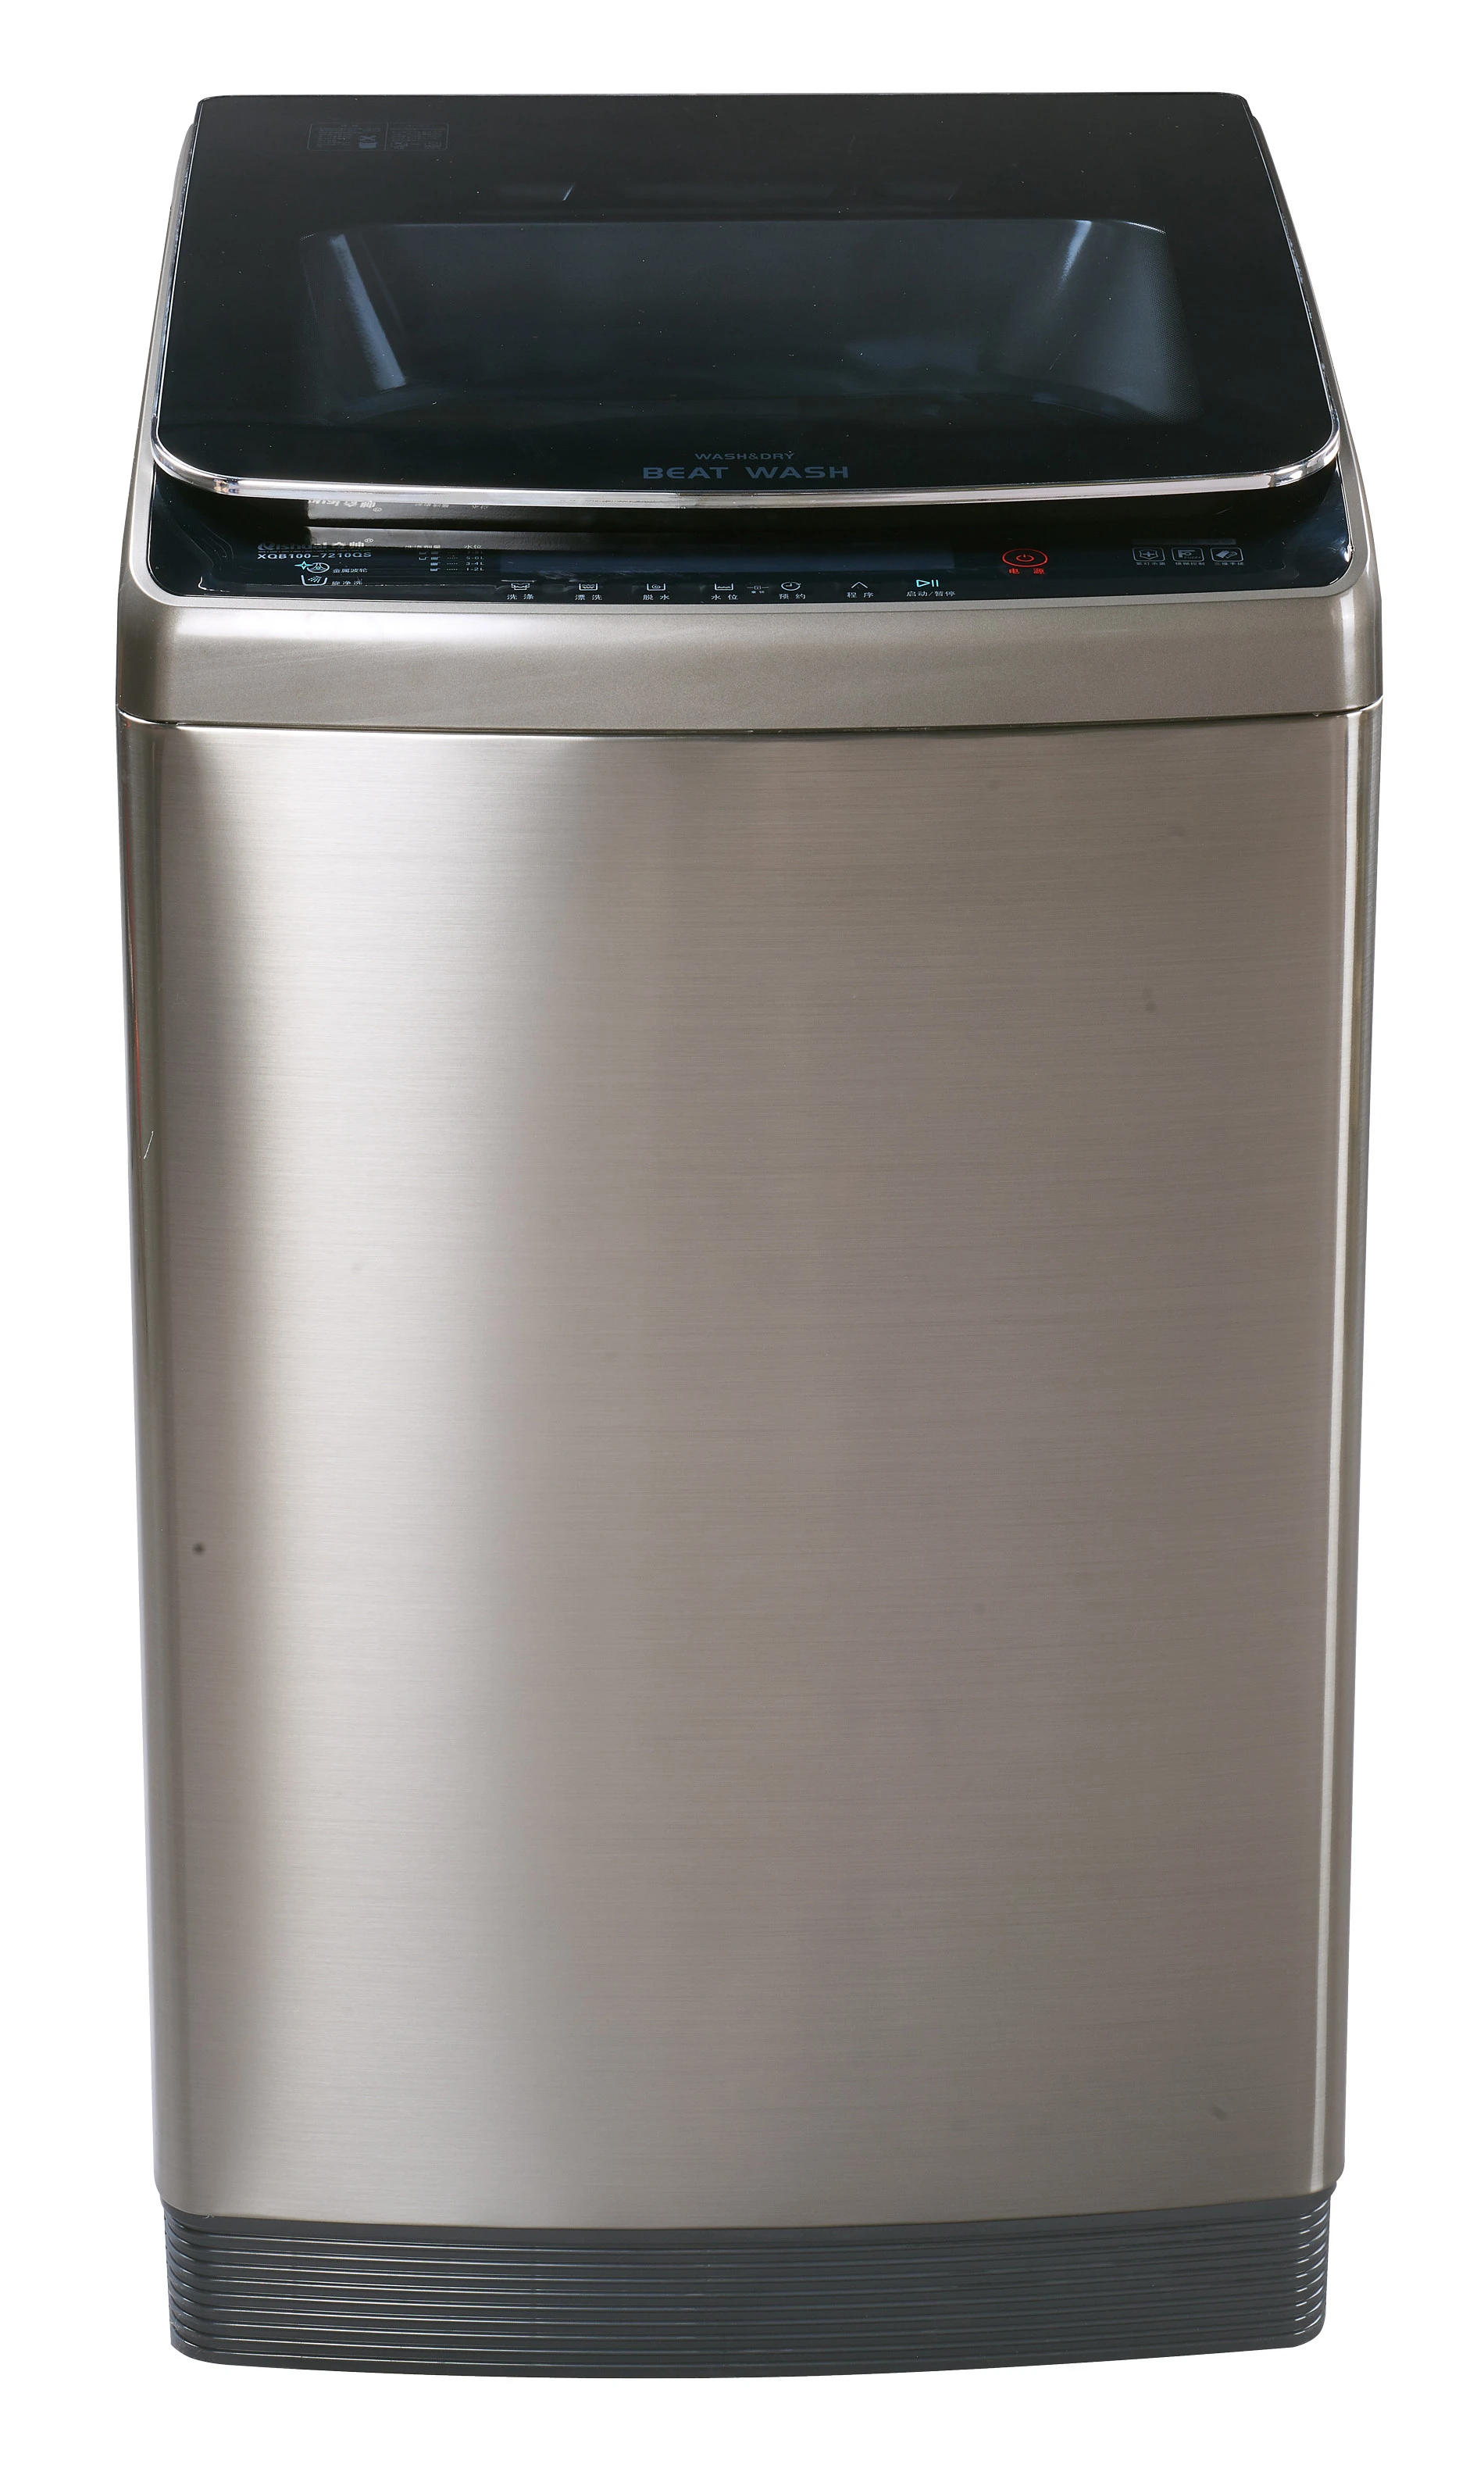 17-1470T-A 8kg  XQB80-A768  top loading fully auto washing machine for home